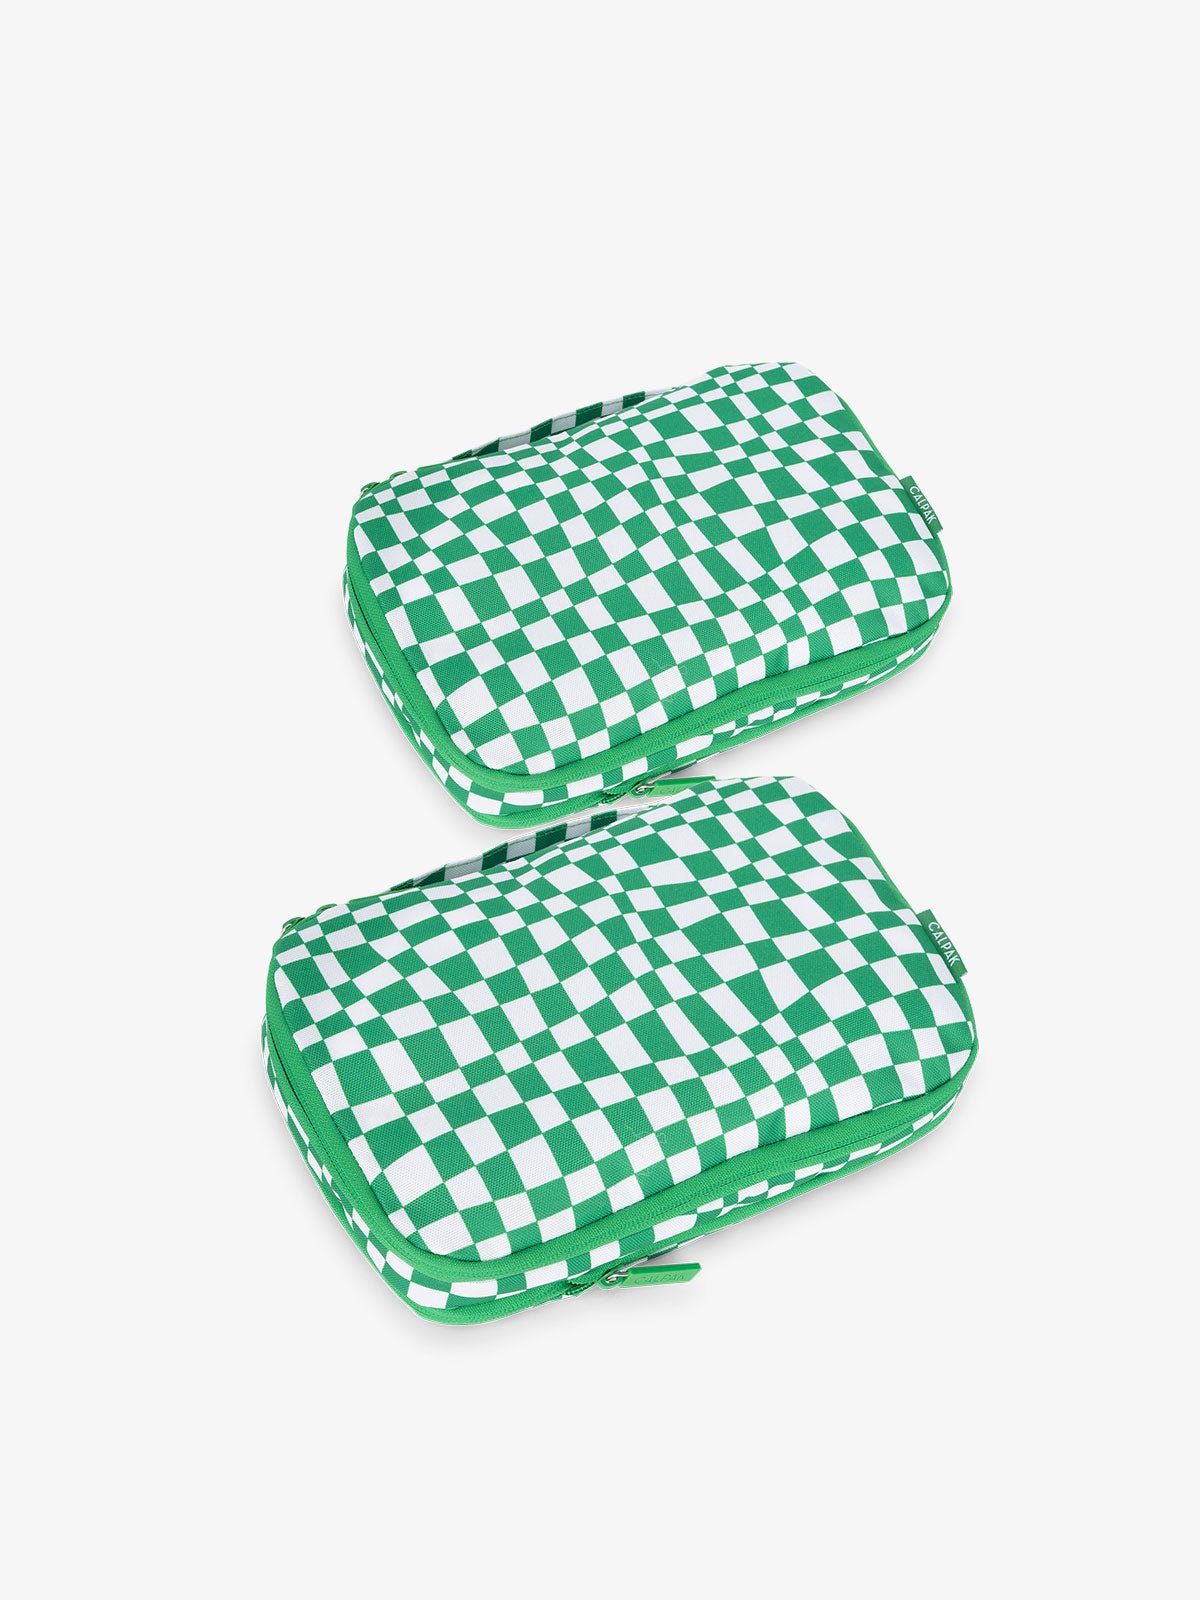 CALPAK small compression packing cubes in green and white checker print